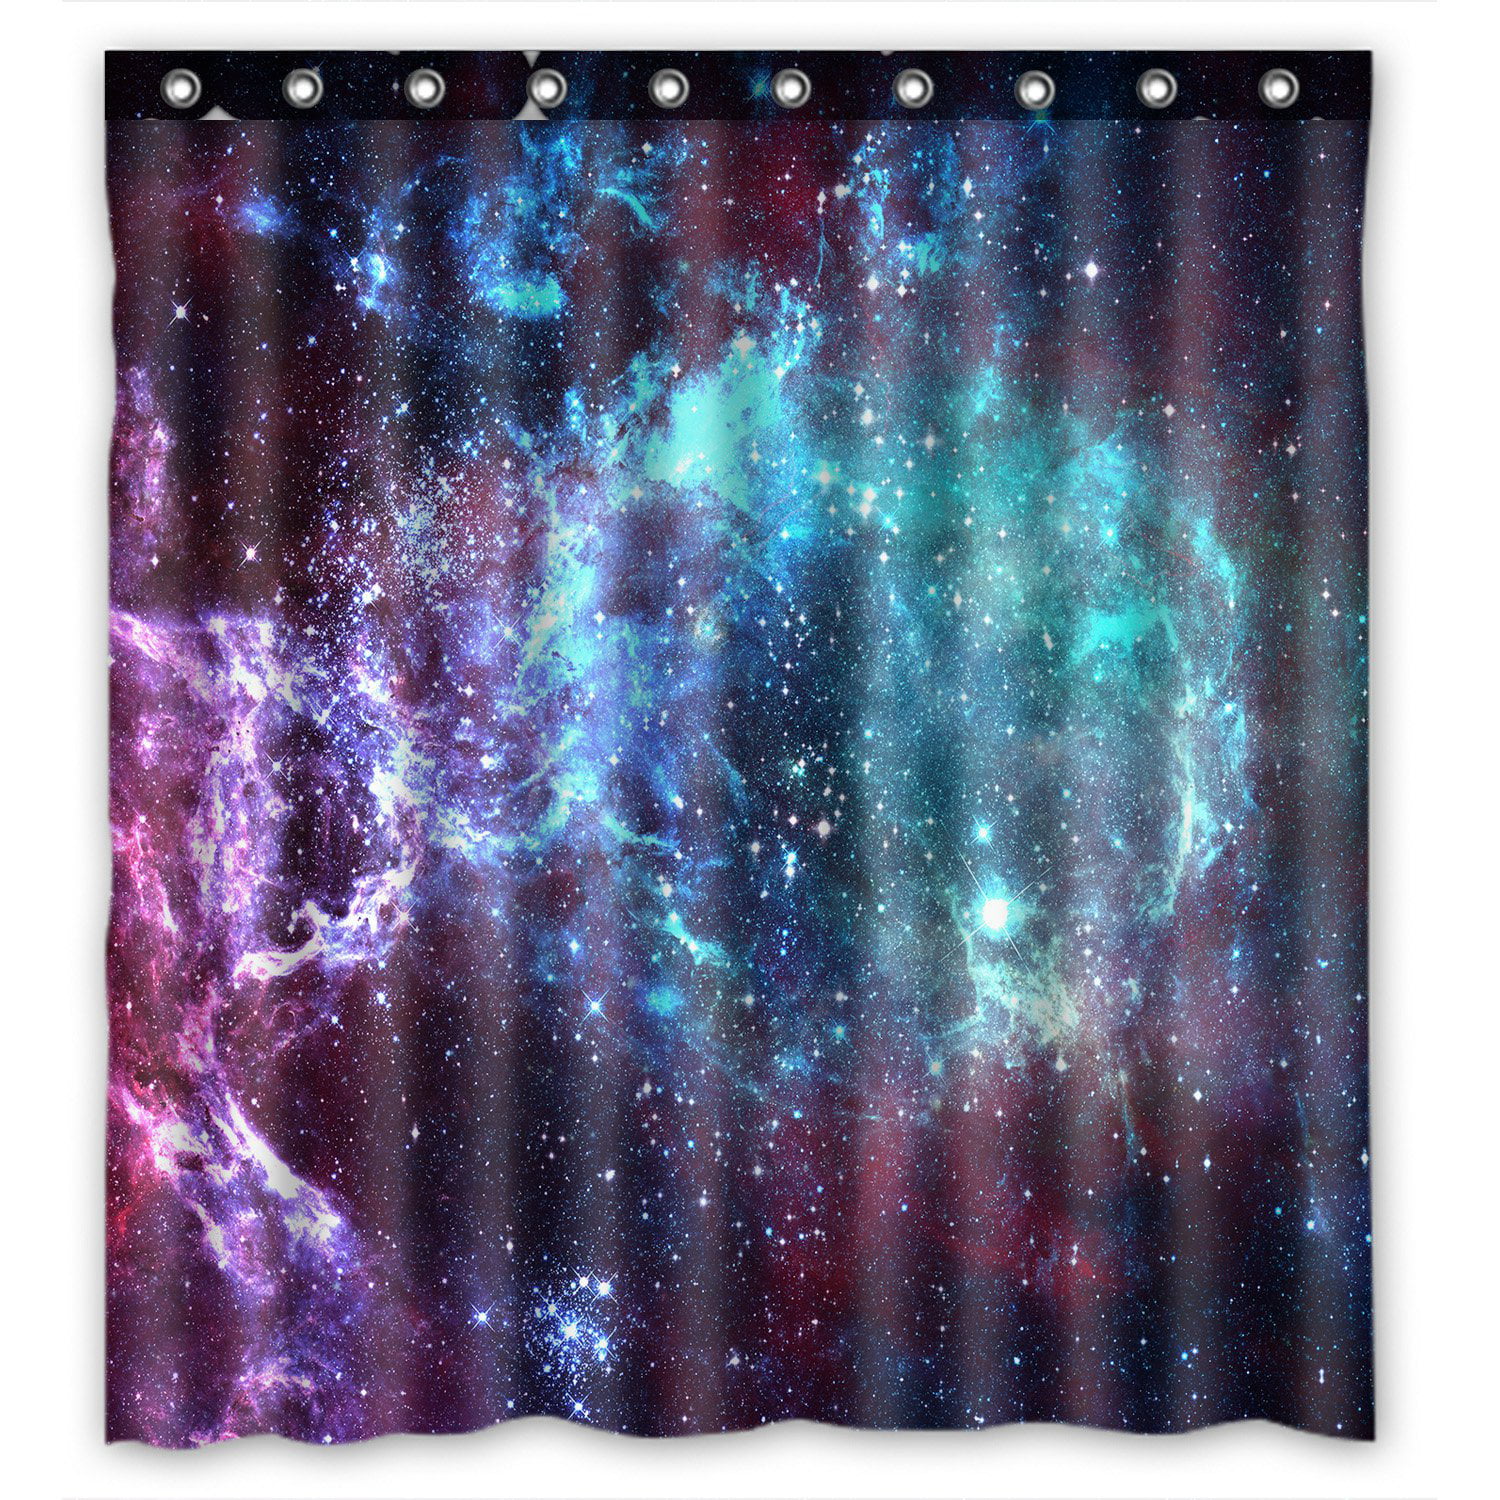 Details about   Galaxy Shower Curtain Cloudy Space Cosmos Print for Bathroom 